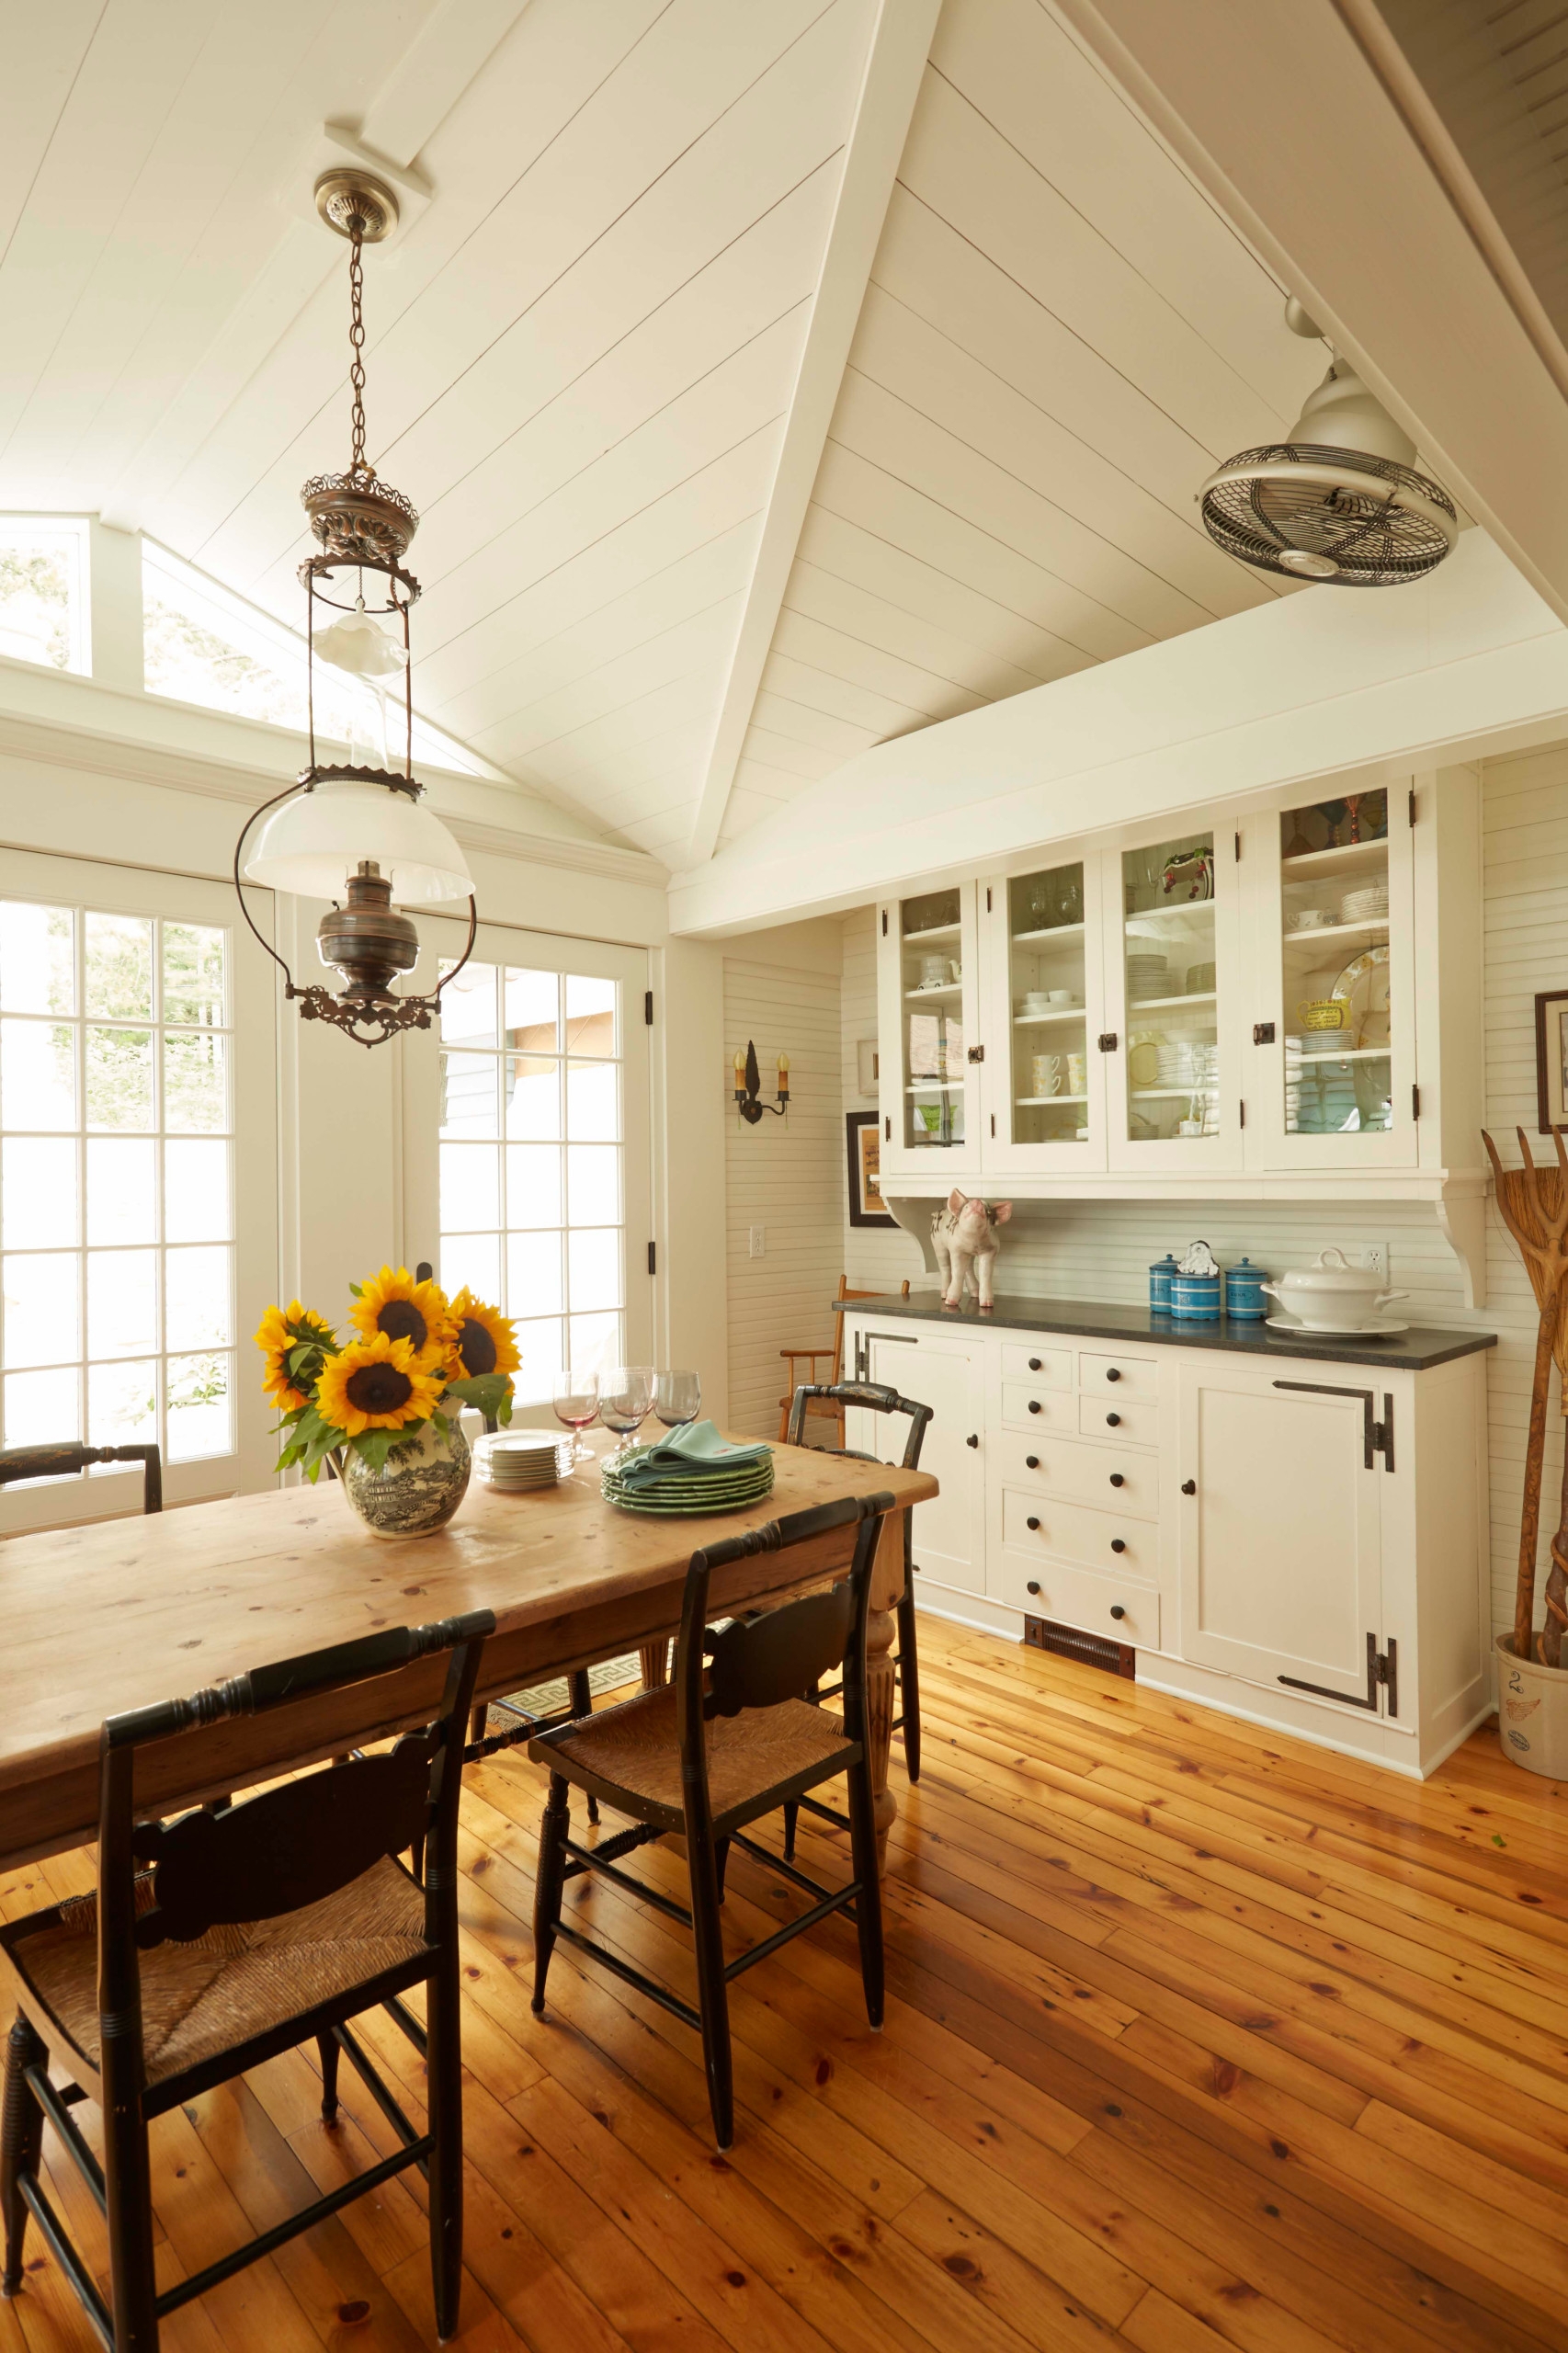 Rustic Kitchen With White Cabinet
